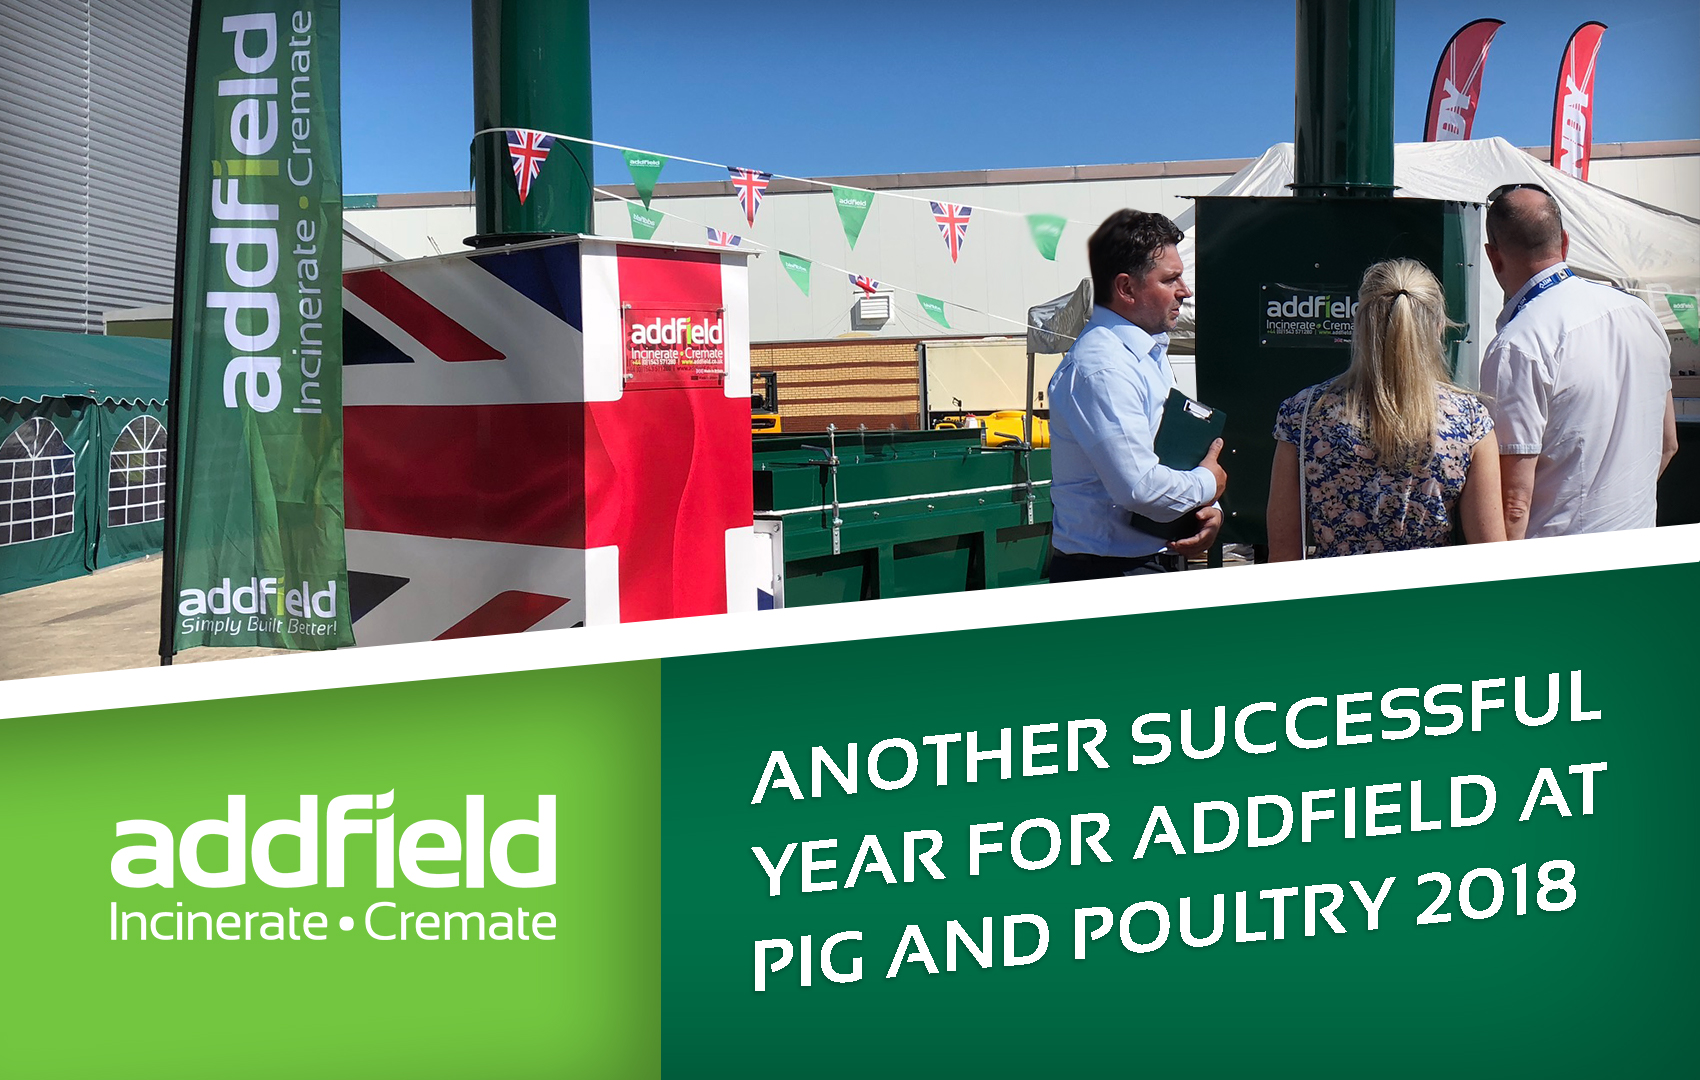 Showcasing Agricultural machines at the Pig and Poultry Show